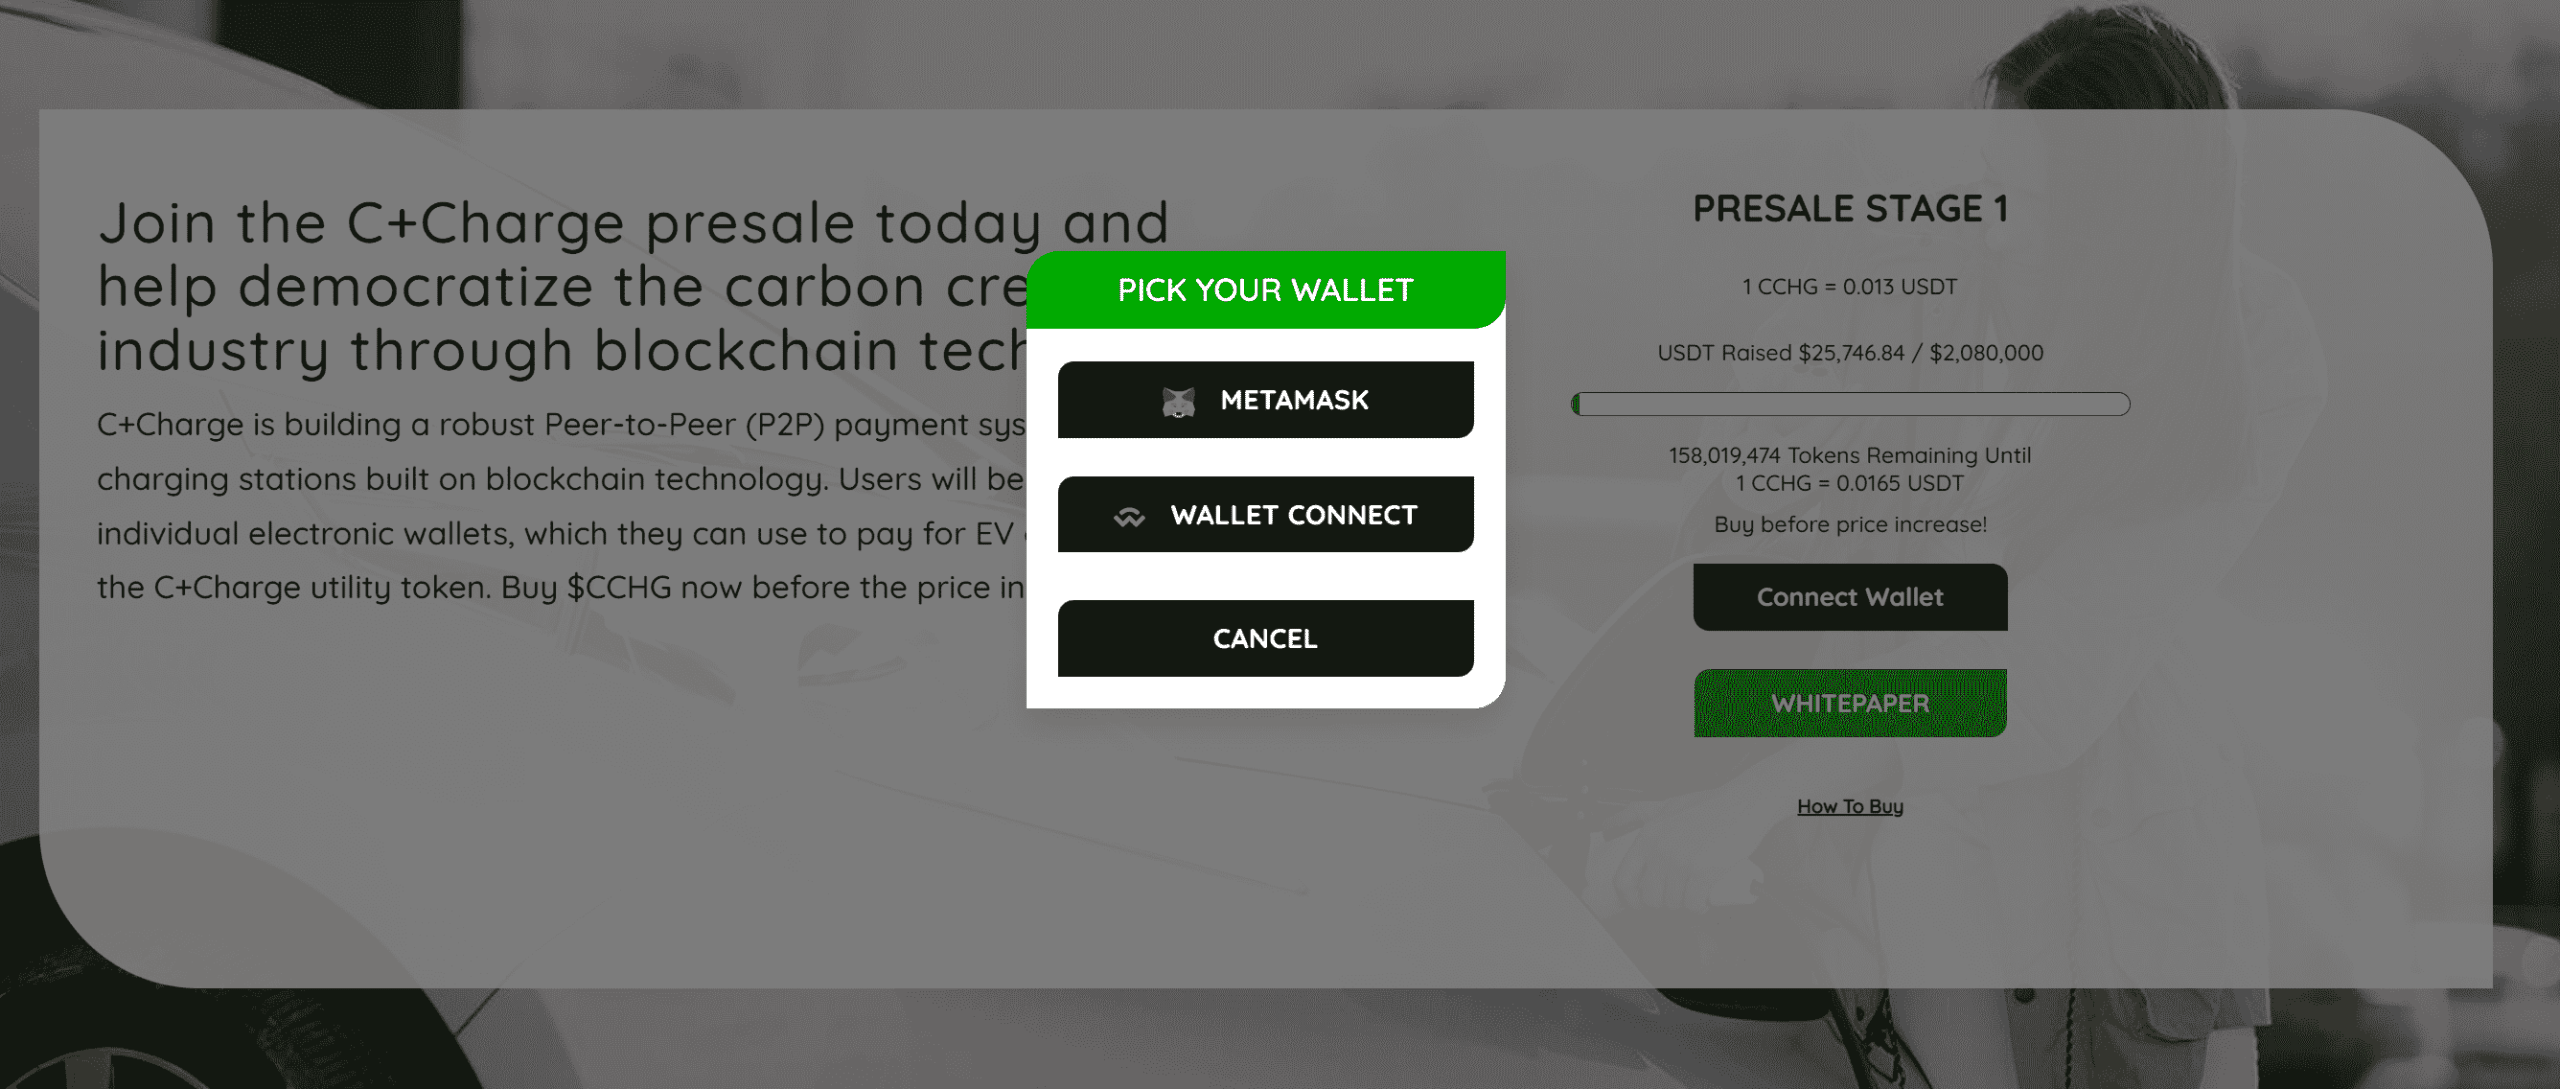 C+Charge Presale Page Pick your Wallet 